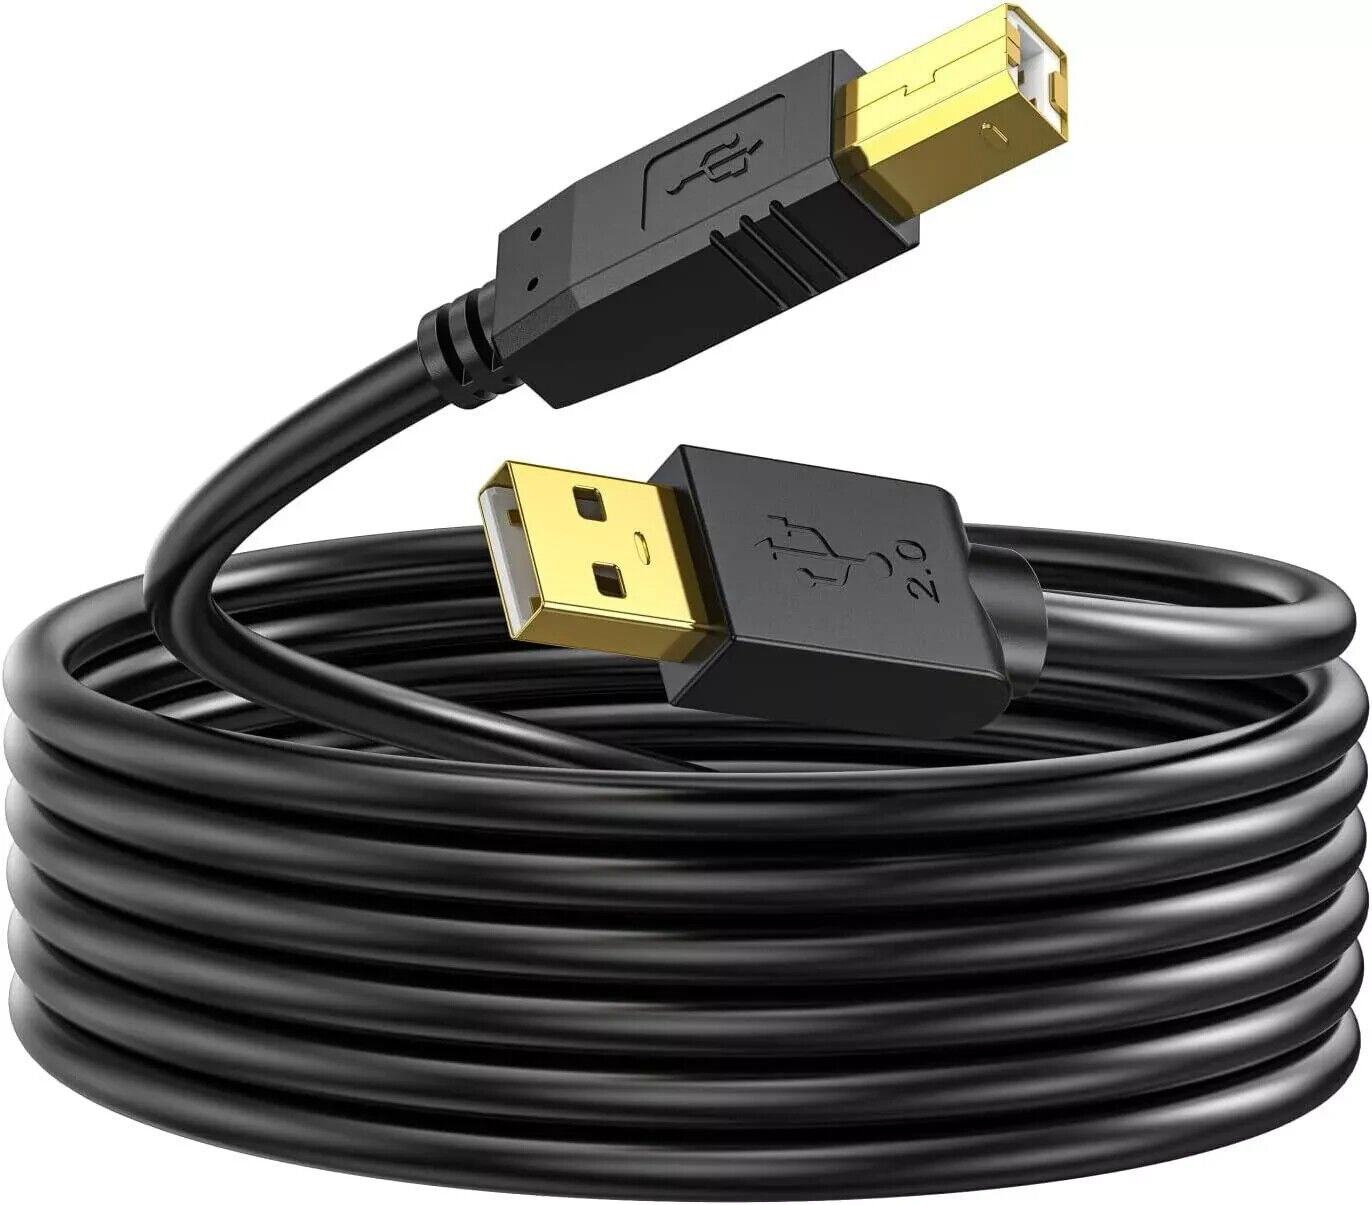 Printer Cable 20 ft USB 2.0 Printer Cable Cord Type A-Male to B-Male Cable NEW 